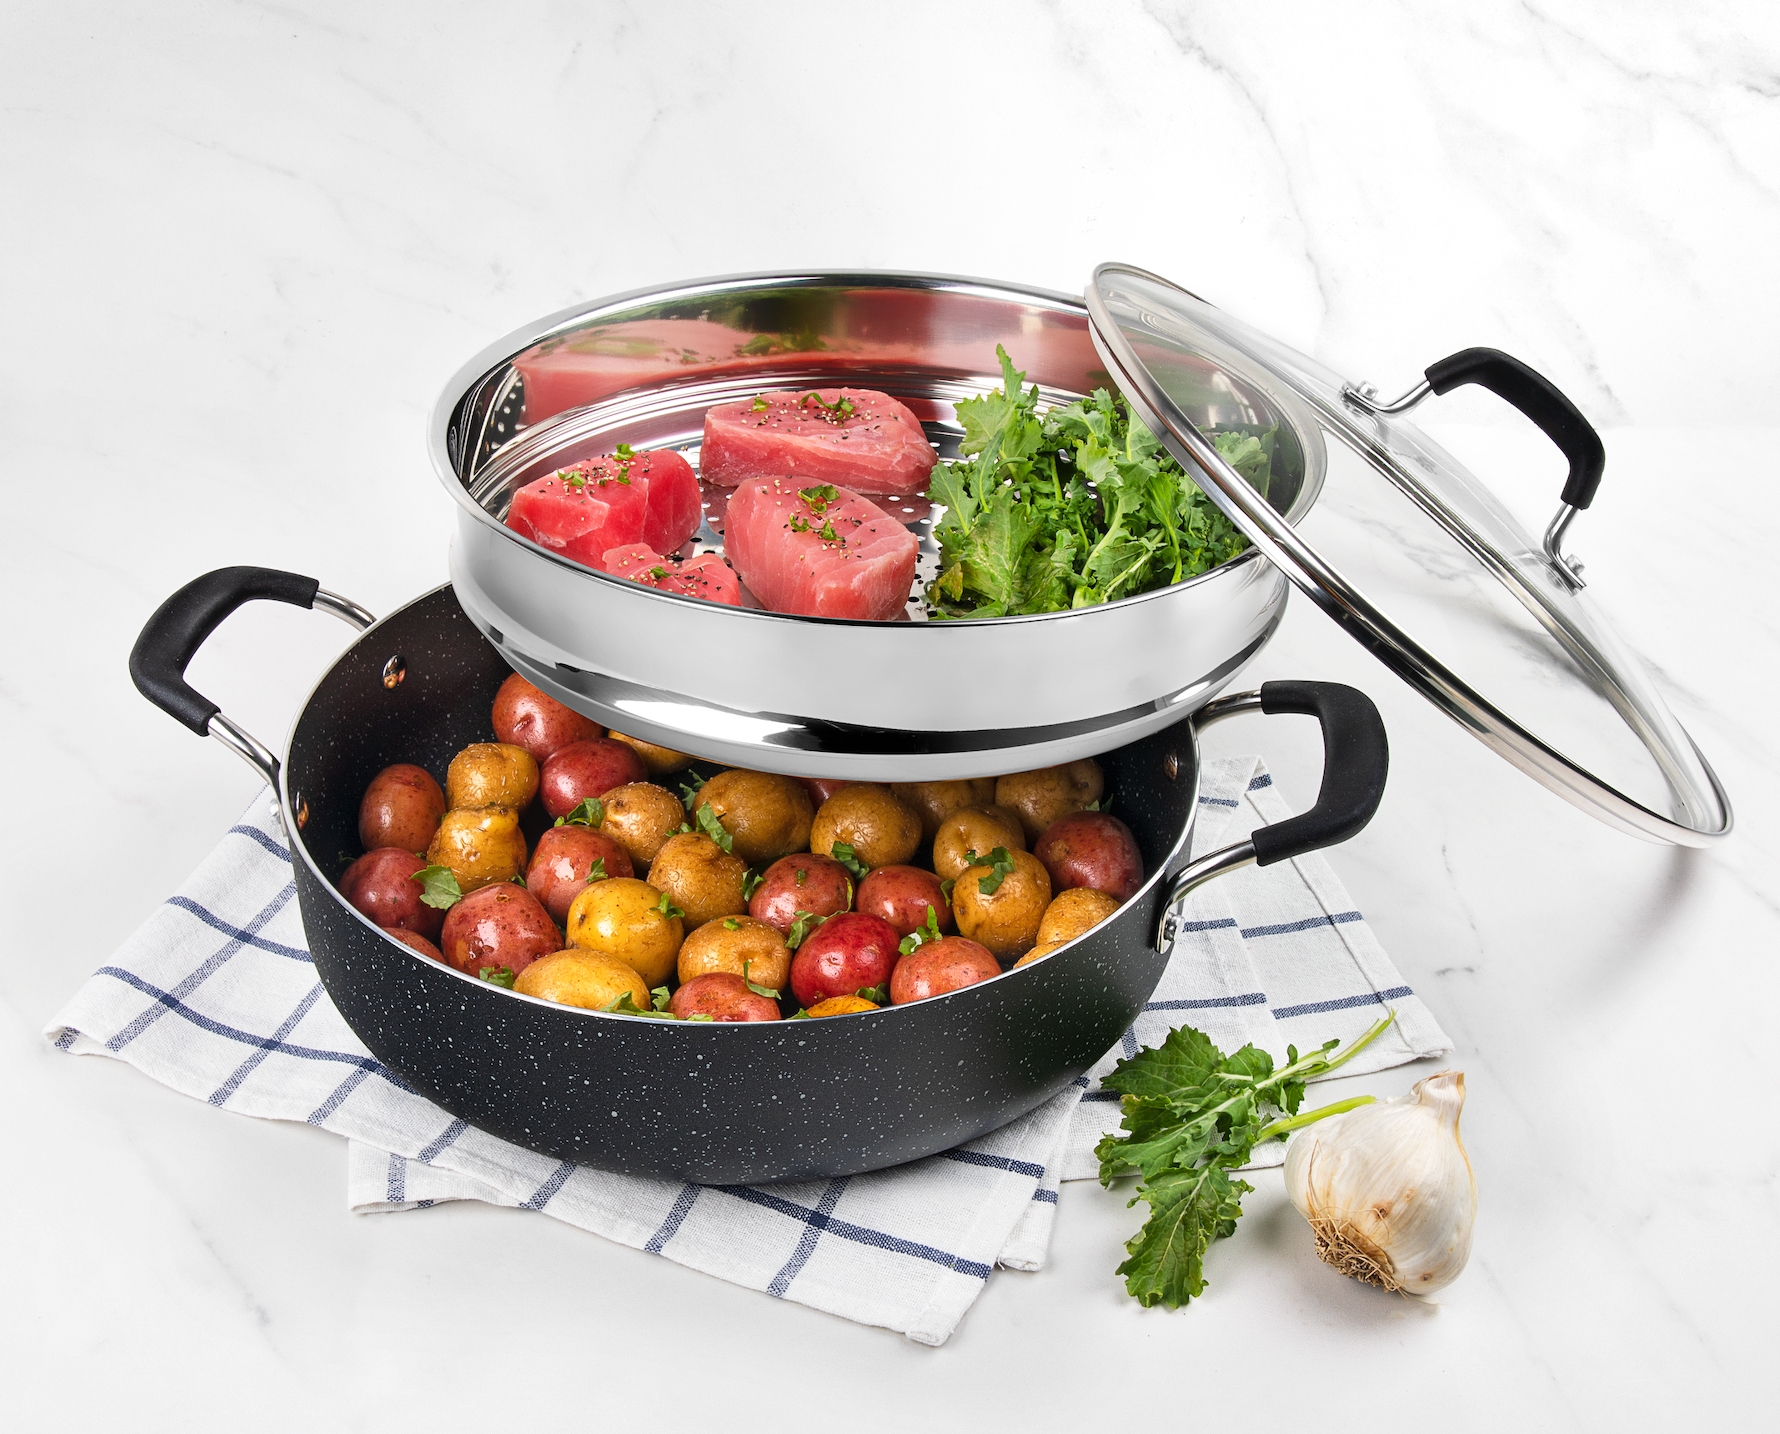 Granitestone Steam Pot for Cooking, Nonstick 2 Tier Steamer Pot for Cooking  & Vegetable Steamer, 3 Piece Steaming Pot Set with 5.5 Quart Stock